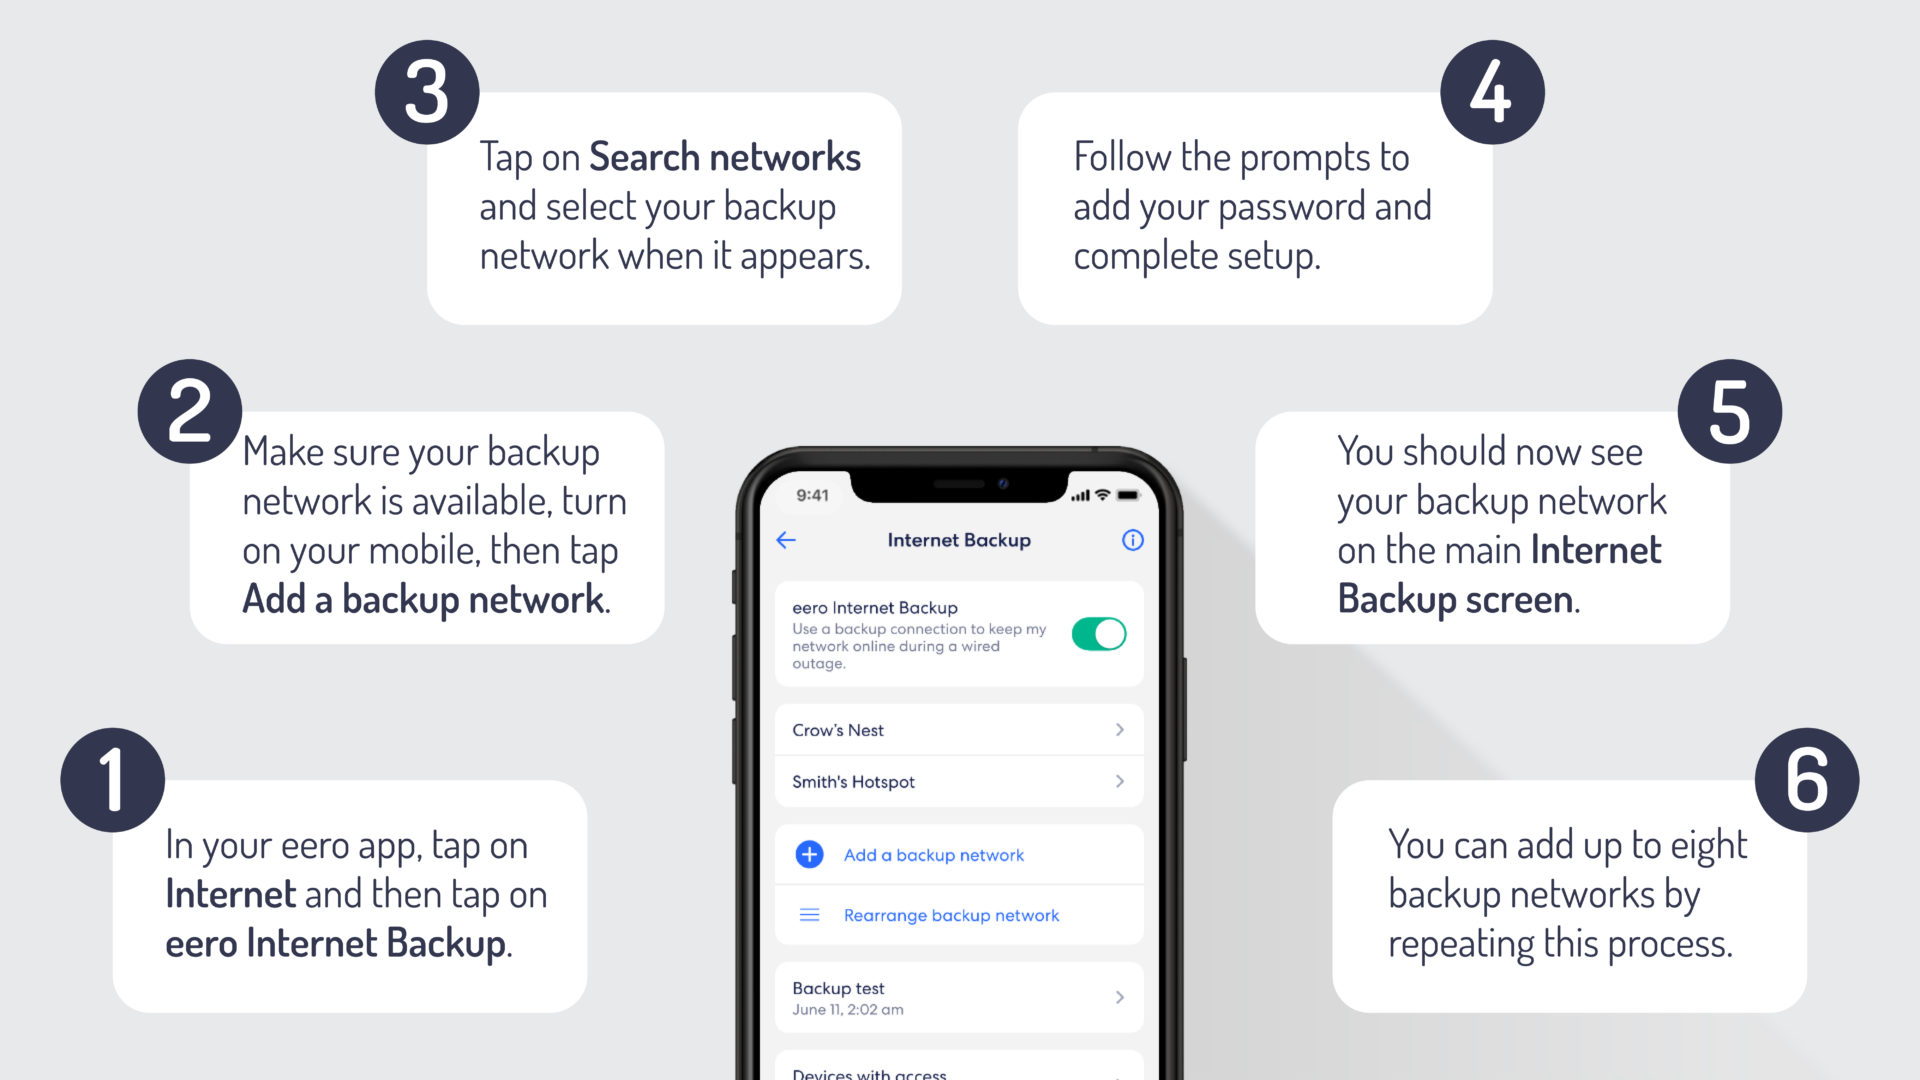 eero Internet Backup step by step instructions